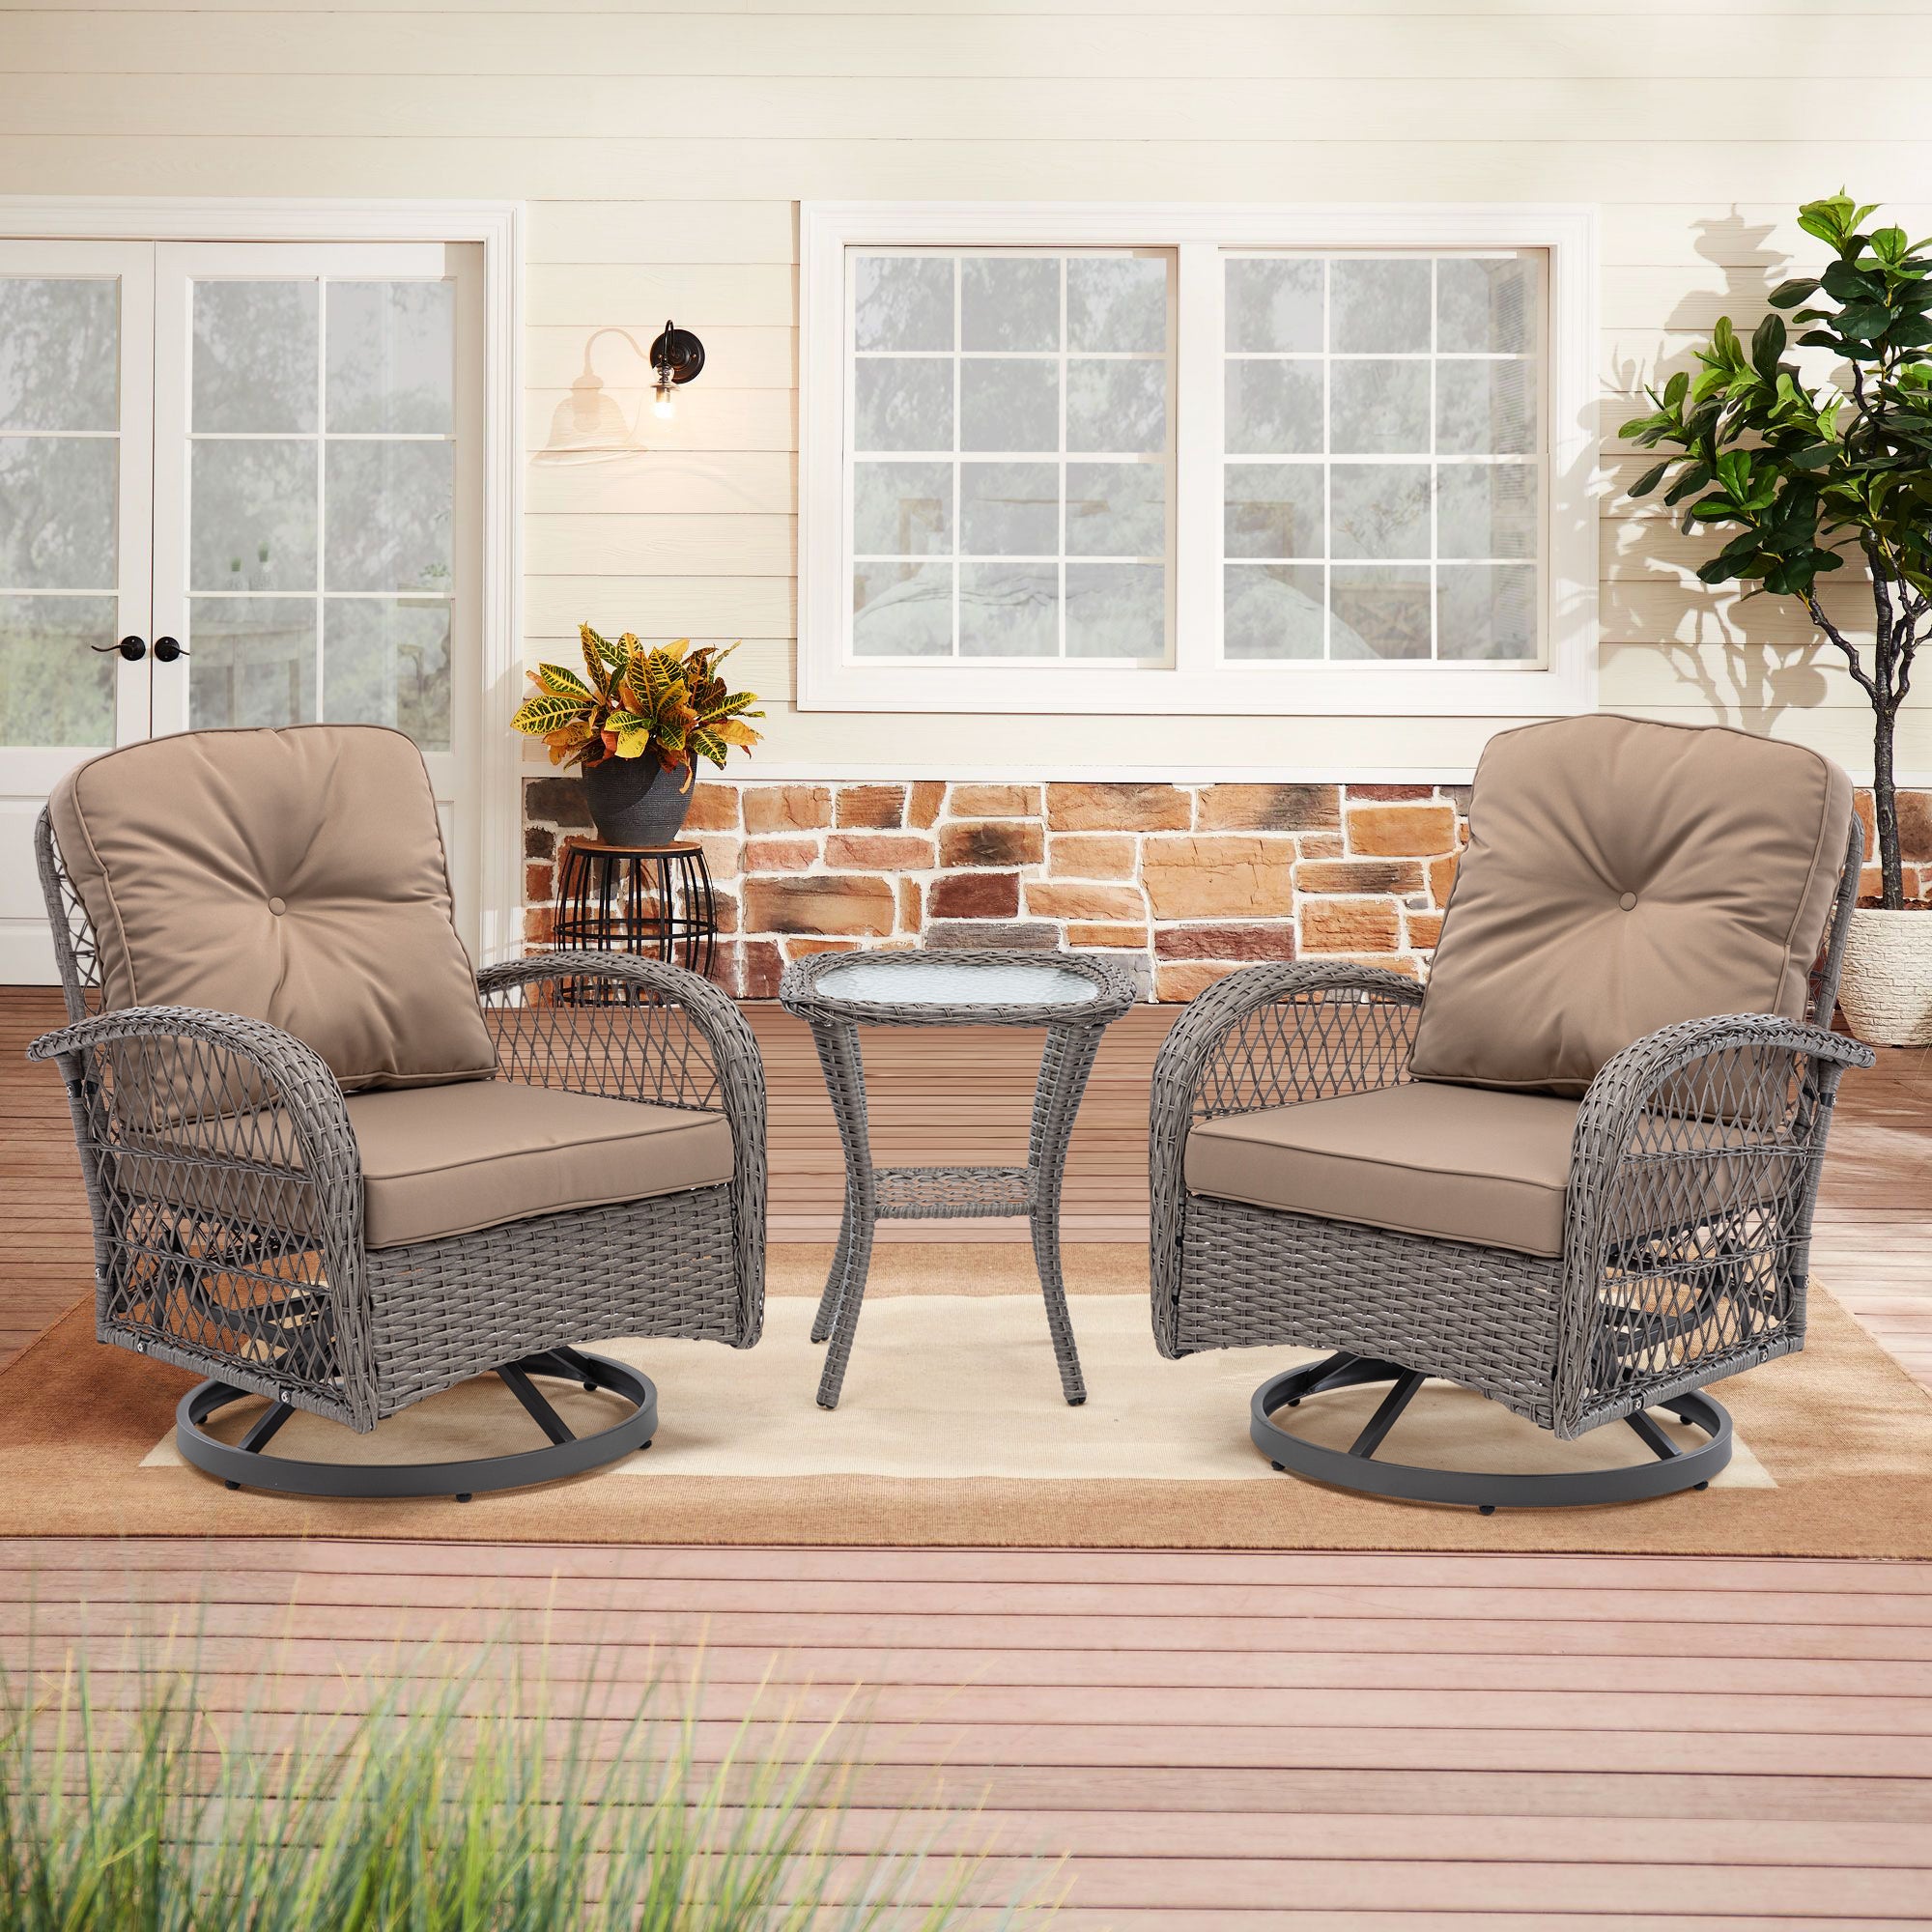 🆓🚛 3 Pieces Outdoor Swivel Rocker Patio Chairs, 360 Degree Rocking Patio Conversation Set With Thickened Cushions and Glass Coffee Table for Backyard, Khaki